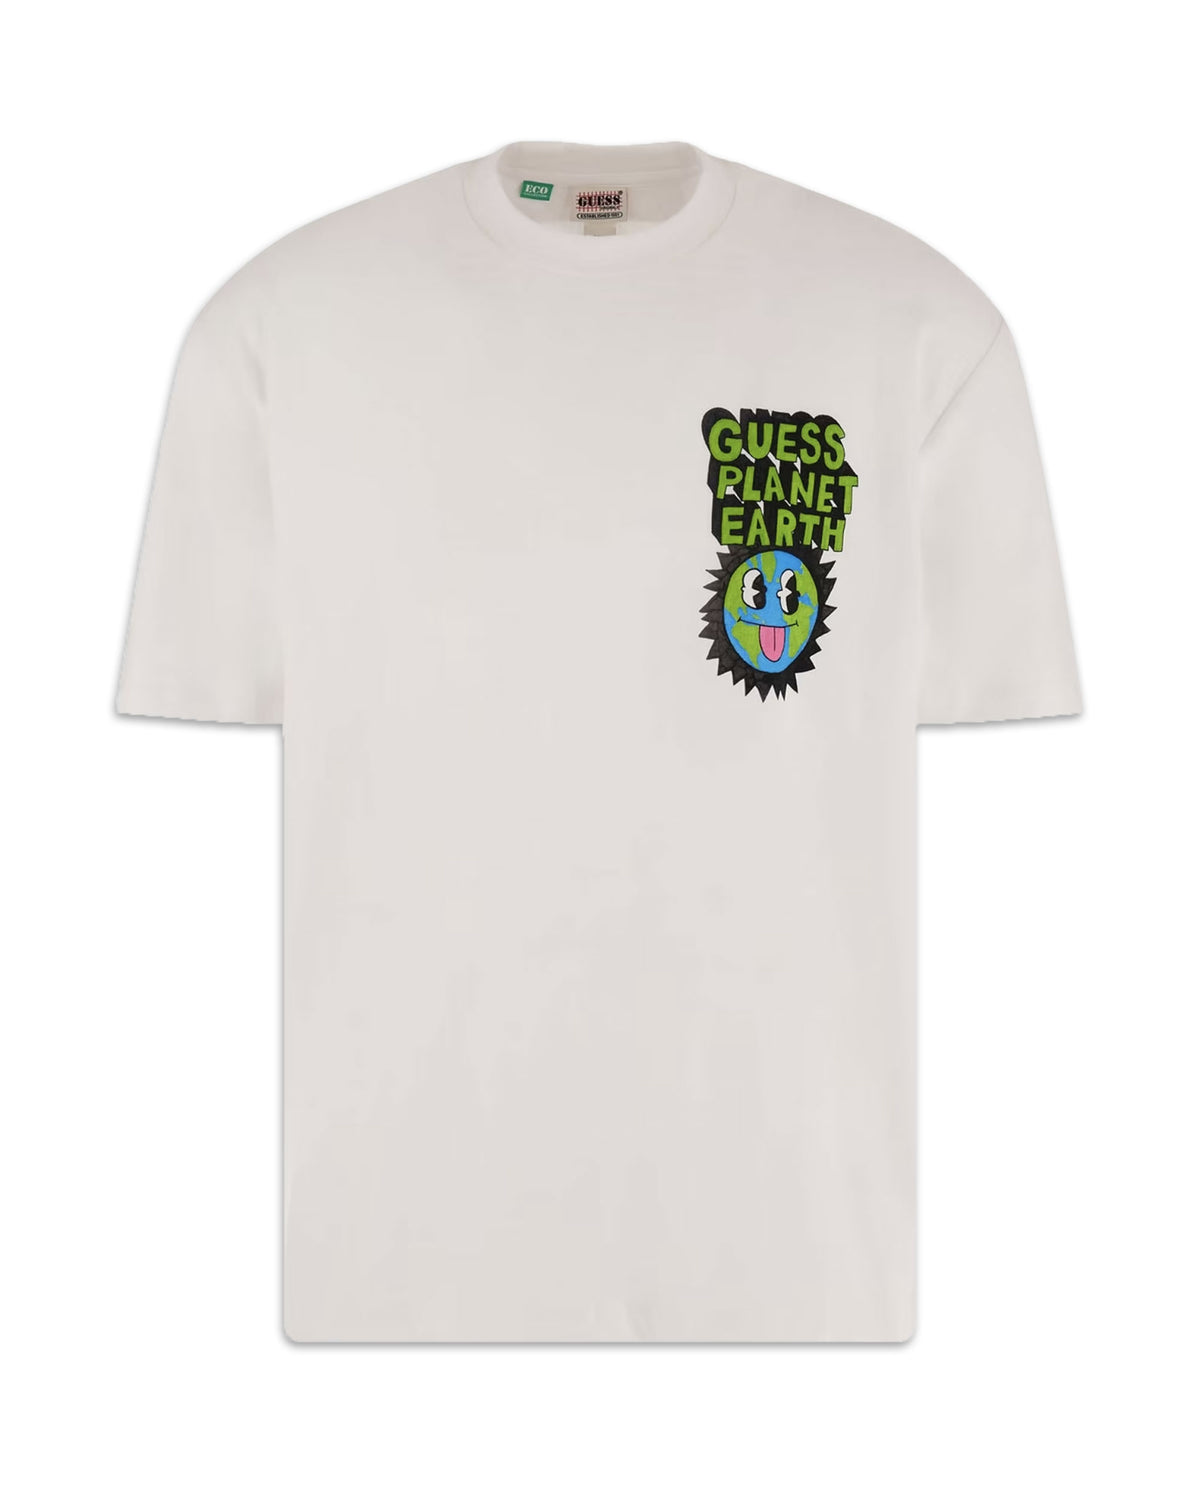 Guess Originals Earth Day Planet Tee White